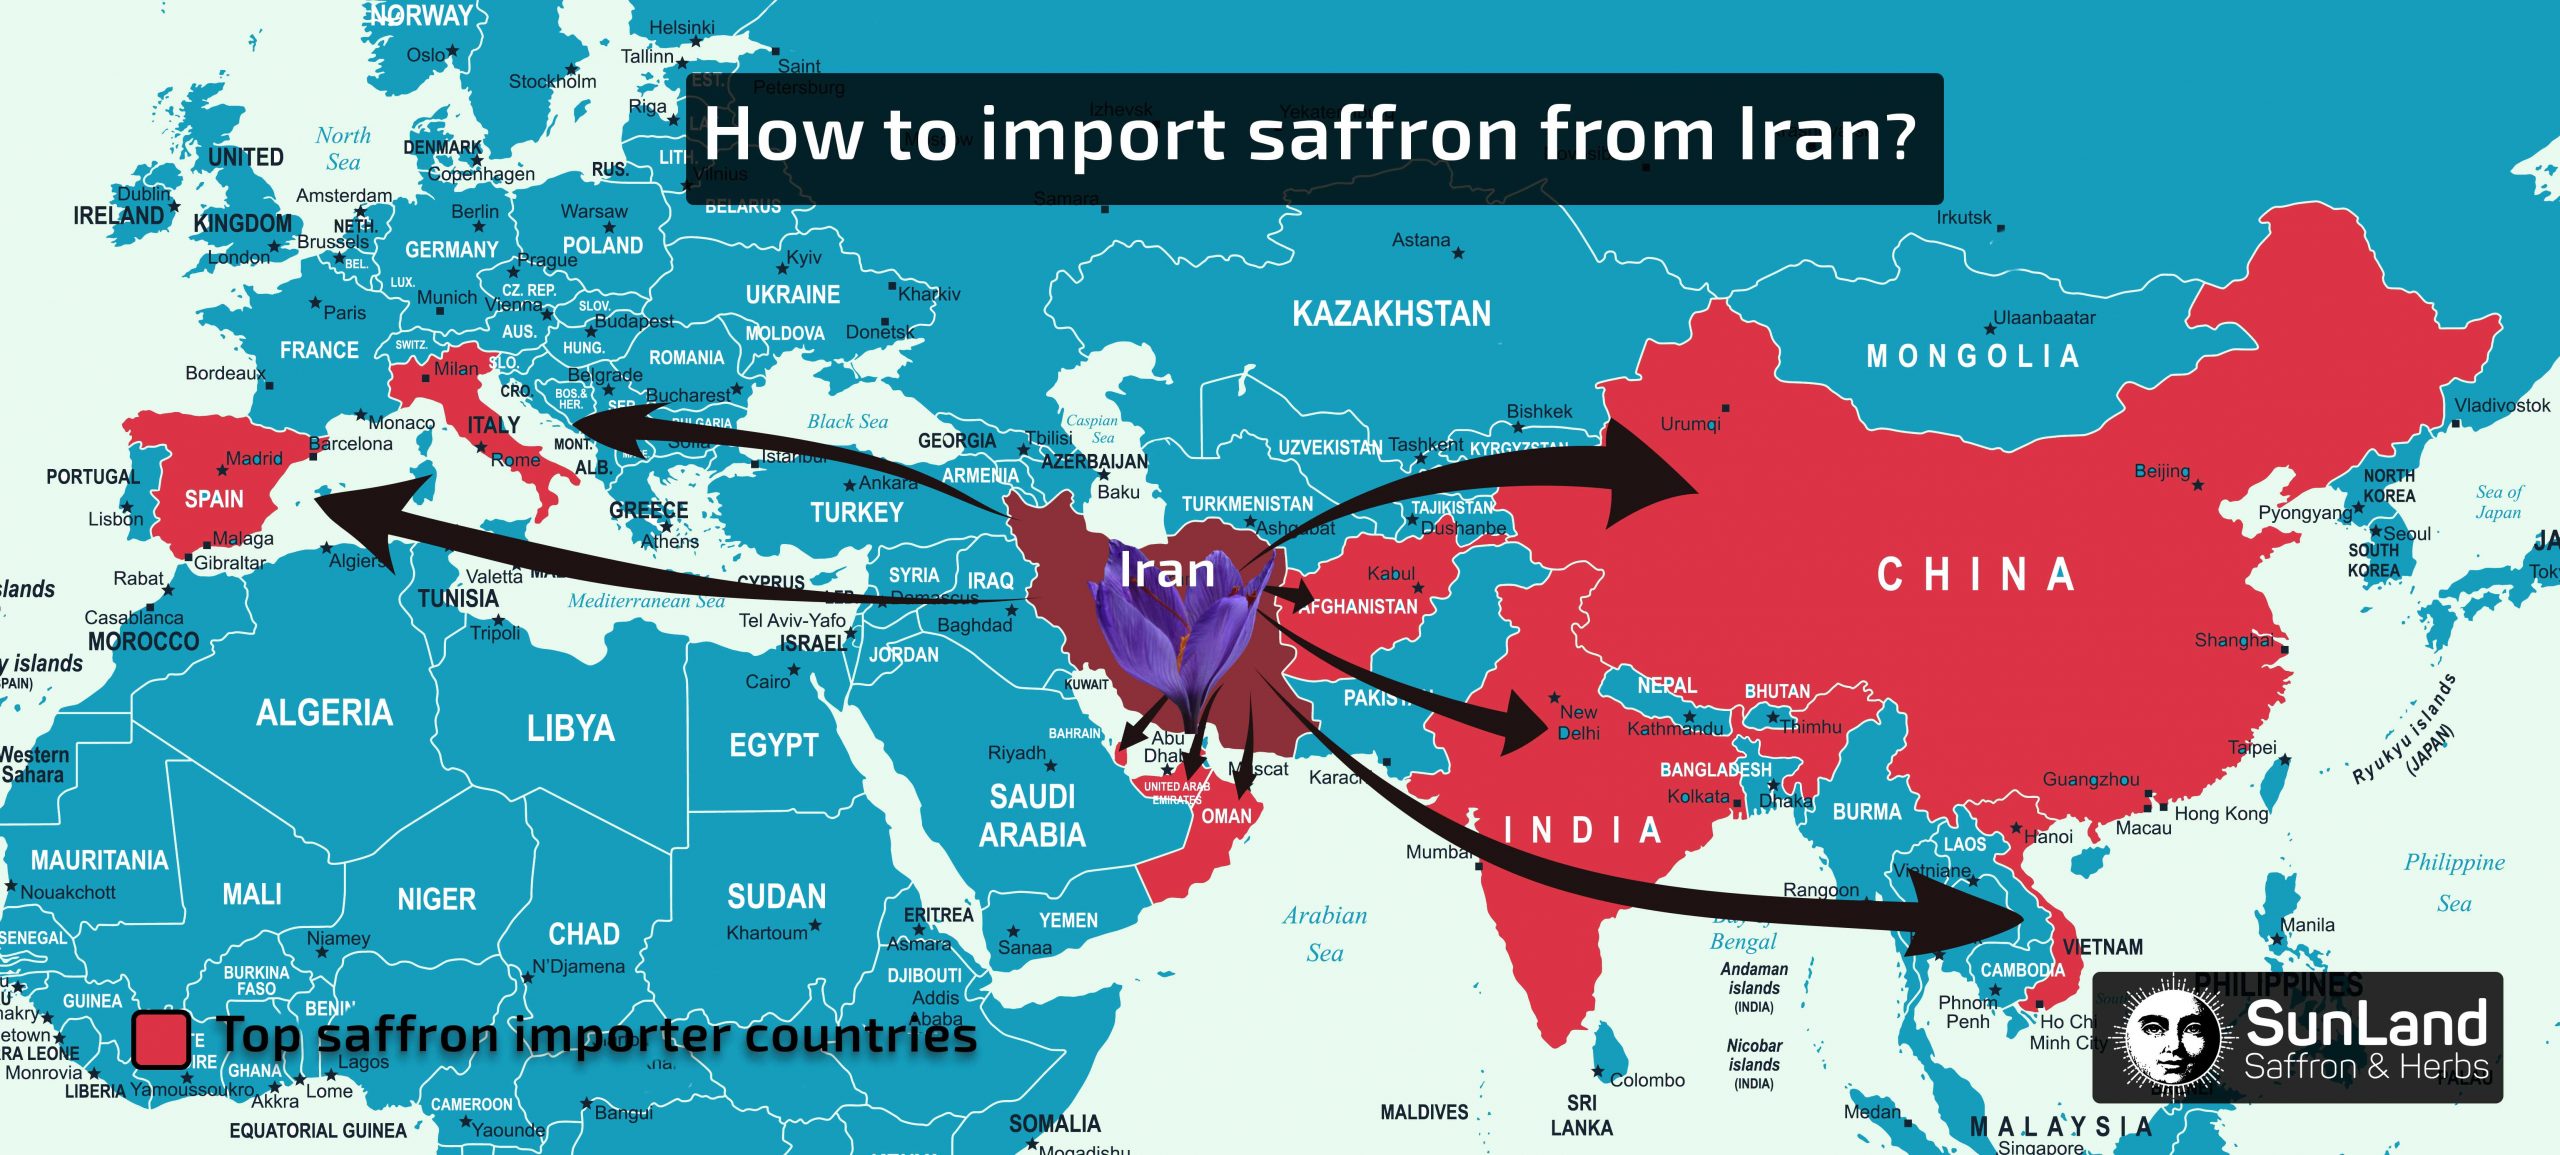 how to import saffron from iran?